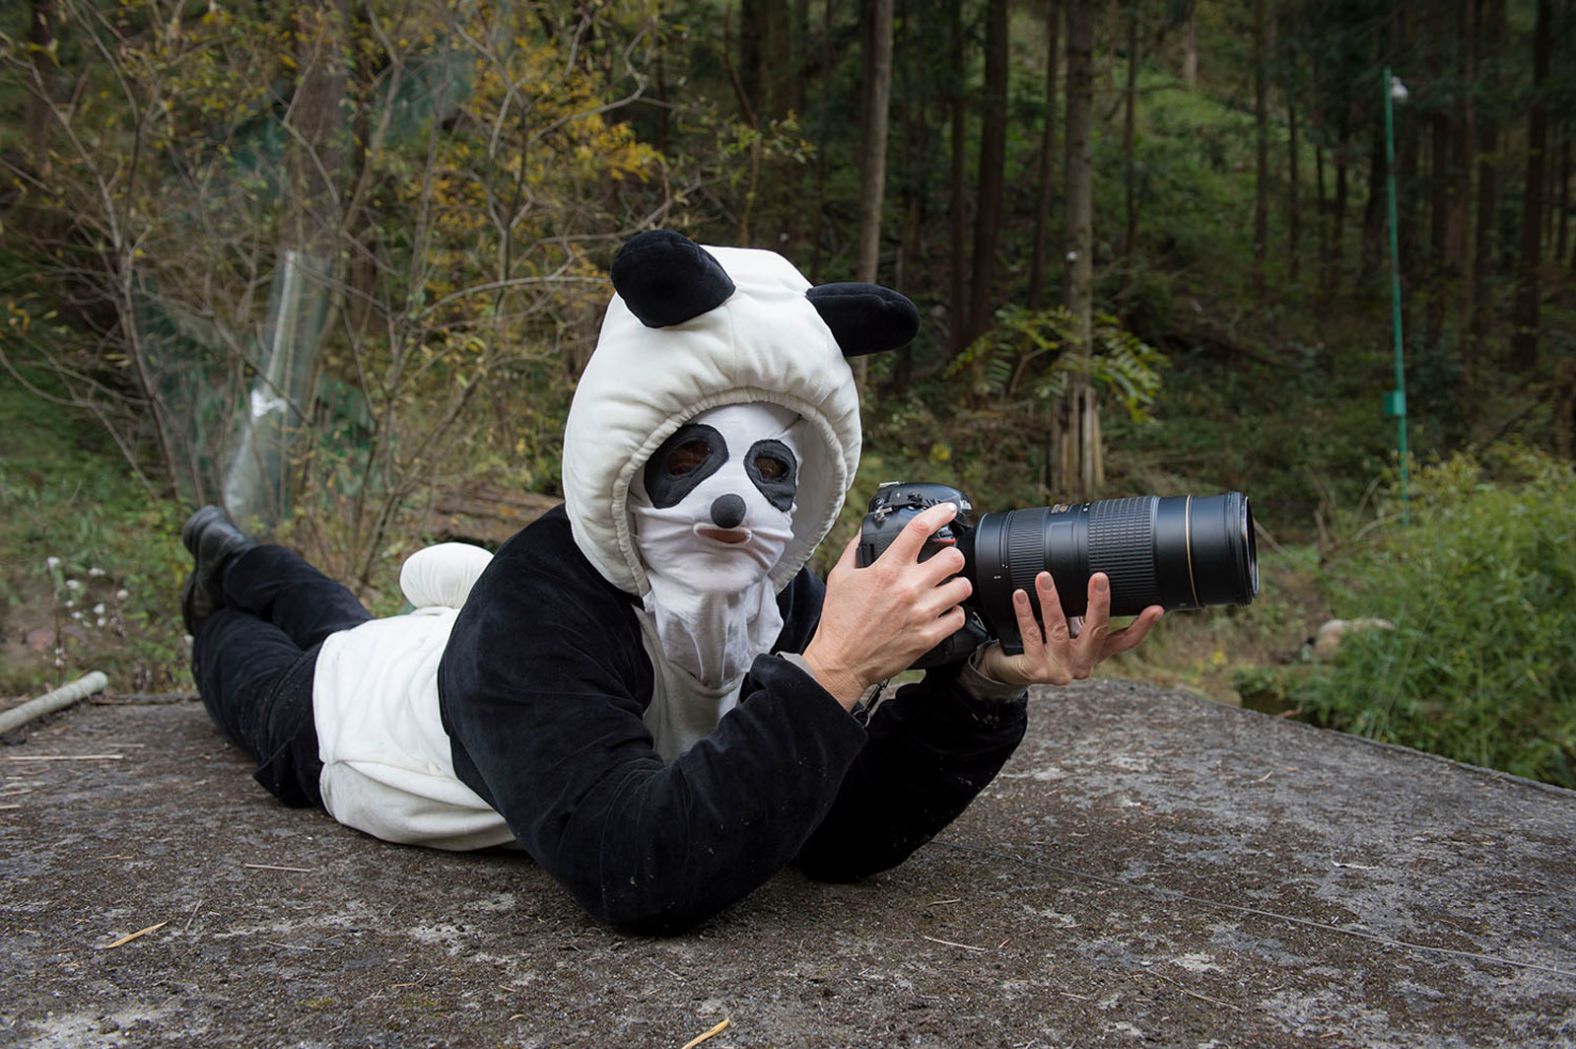 <a href="index.php?page=&url=https%3A%2F%2Fwww.amivitale.com%2F" target="_blank" target="_blank">Ami Vitale,</a> a photographer for National Geographic magazine, wears a panda costume while documenting Chinese facilities <a href="index.php?page=&url=https%3A%2F%2Fwww.cnn.com%2Finteractive%2F2018%2F06%2Fworld%2Fpandas-ami-vitale-cnnphotos%2F" target="_blank">dedicated to saving the species</a>. It's what the workers do there as well, because they don't want the bears to get too familiar with humans. Vitale has traveled to more than 100 countries during her career, she said, bearing witness to not only violence and conflict but also surreal beauty and the enduring power of the human spirit. In recent years, she has shifted her focus to stories about wildlife and the environment. "Storytelling and photography have the unique ability to transcend all languages and help us understand each other," she said. "They remind us of our deep connection to all of life that we share this planet with." 